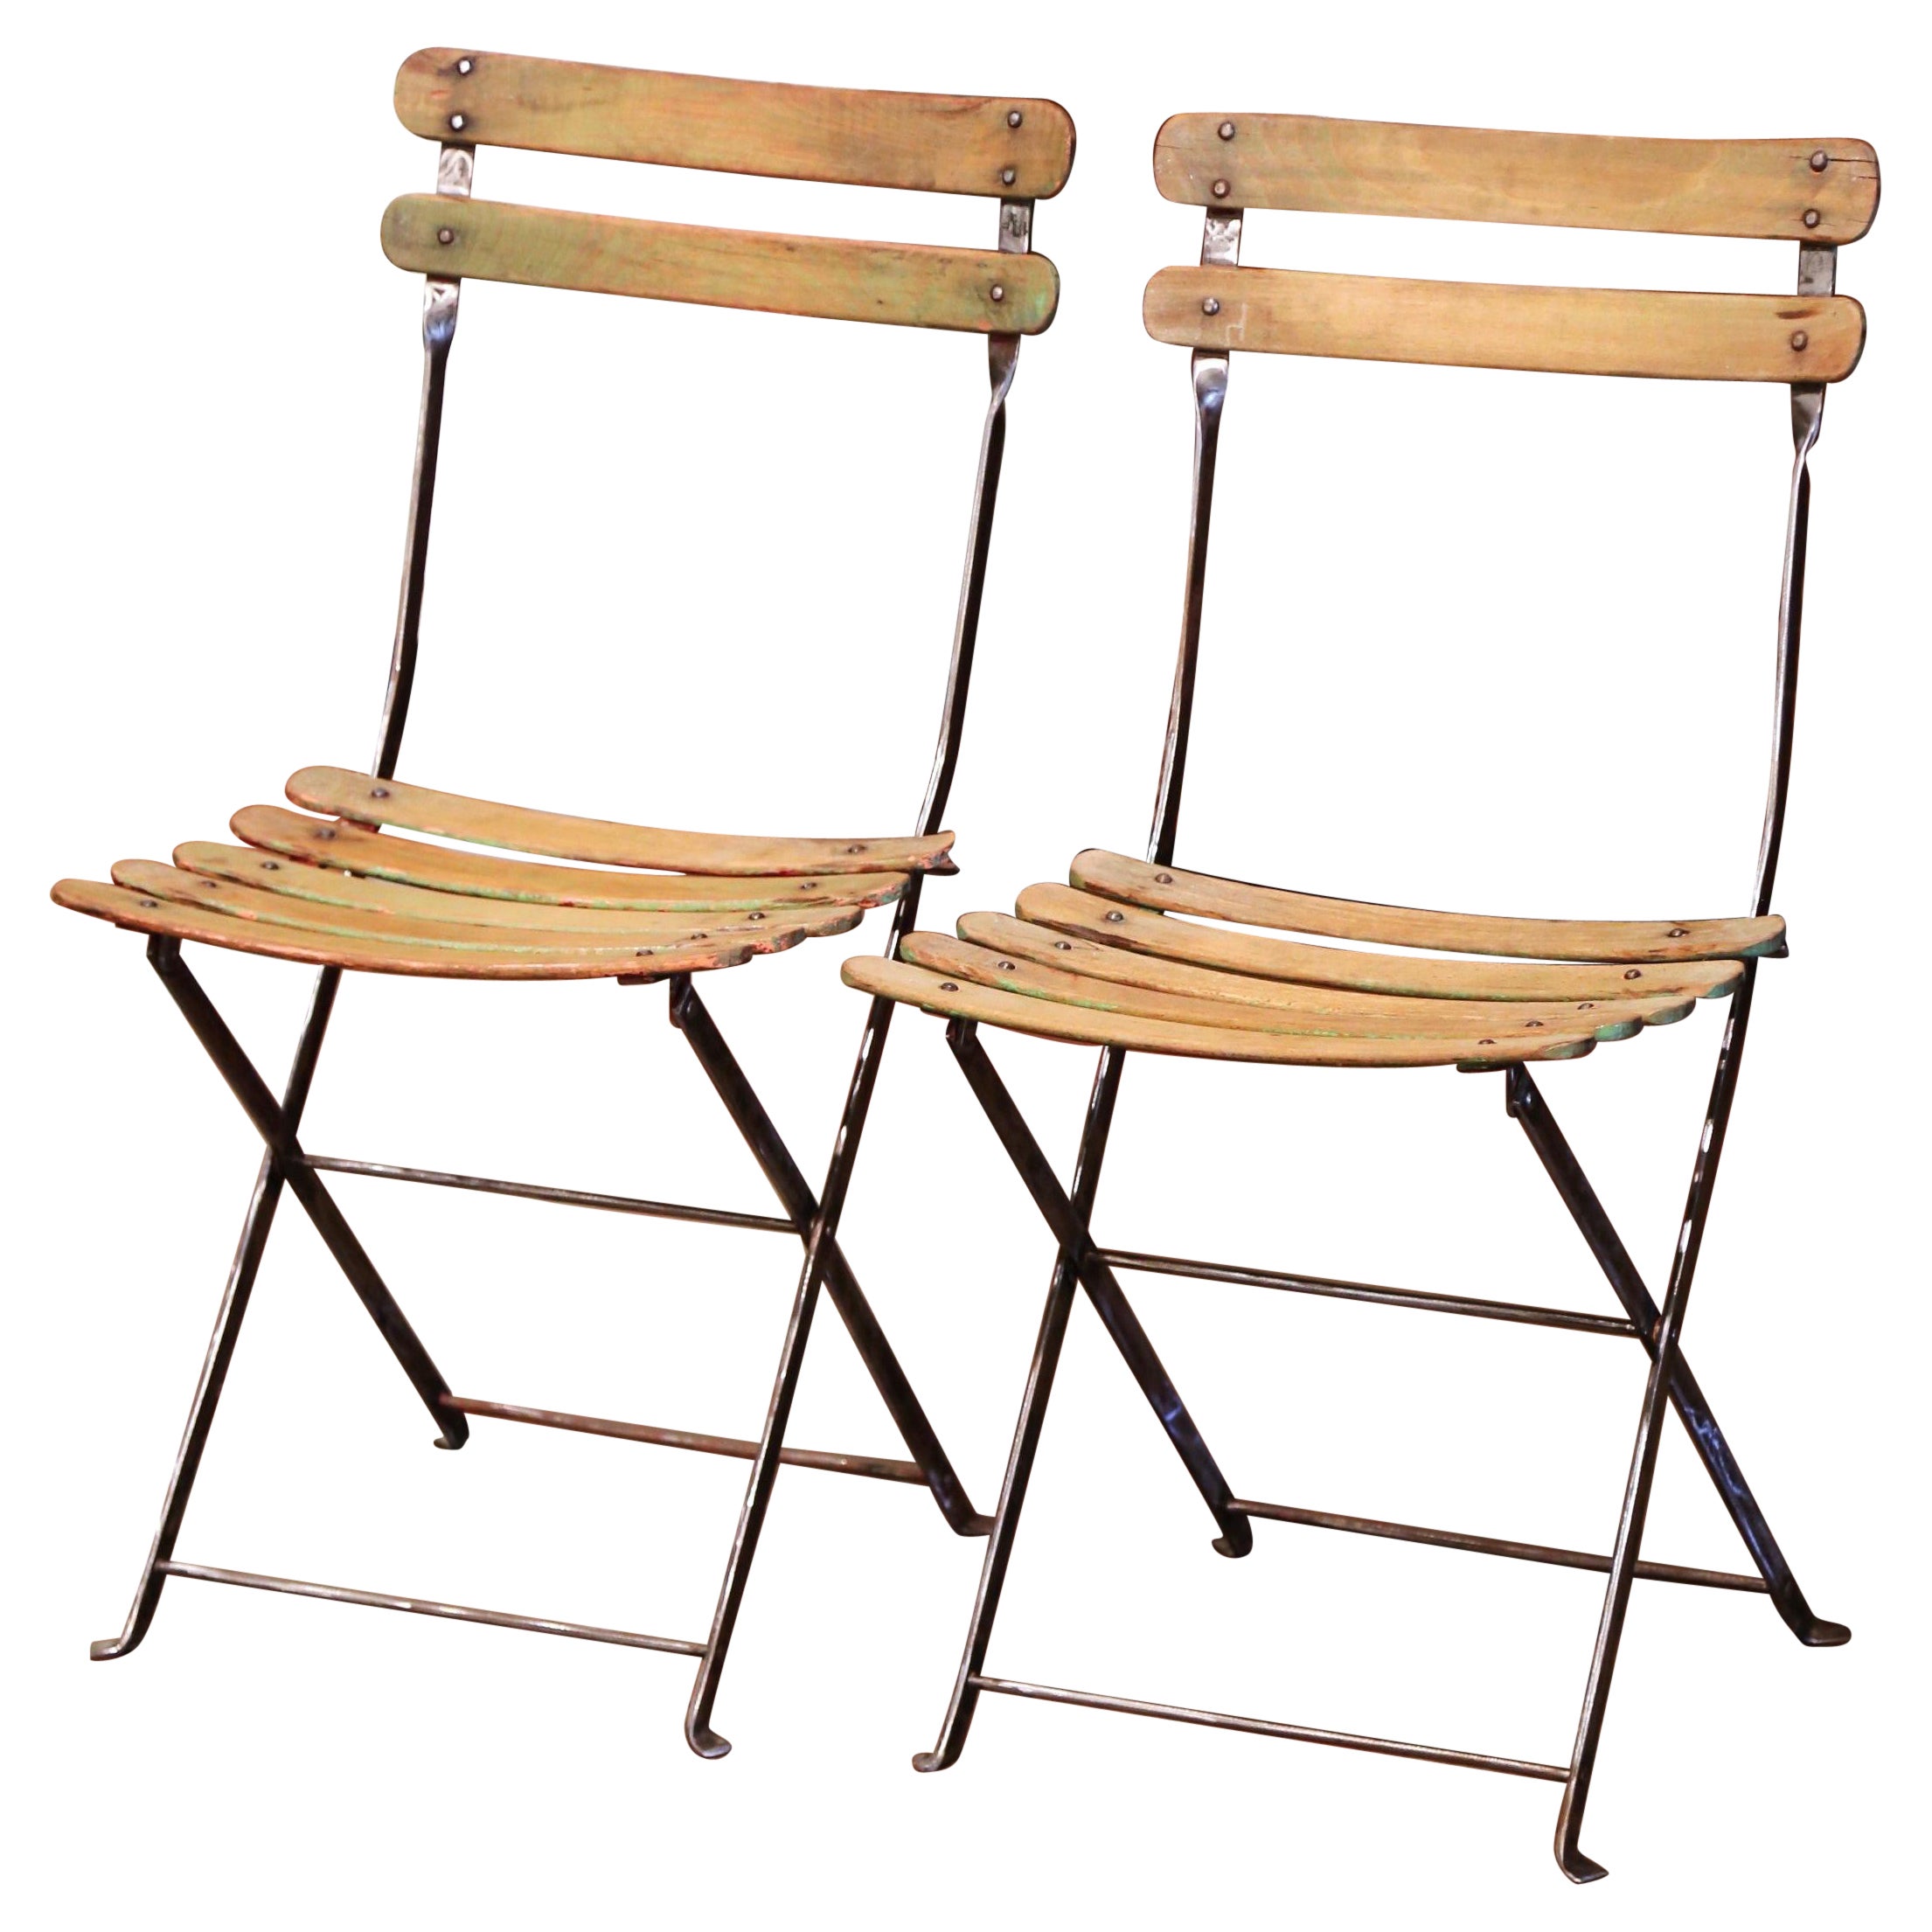 Pair of Early 20th Century French Polished Iron and Wood Folding Garden Chairs